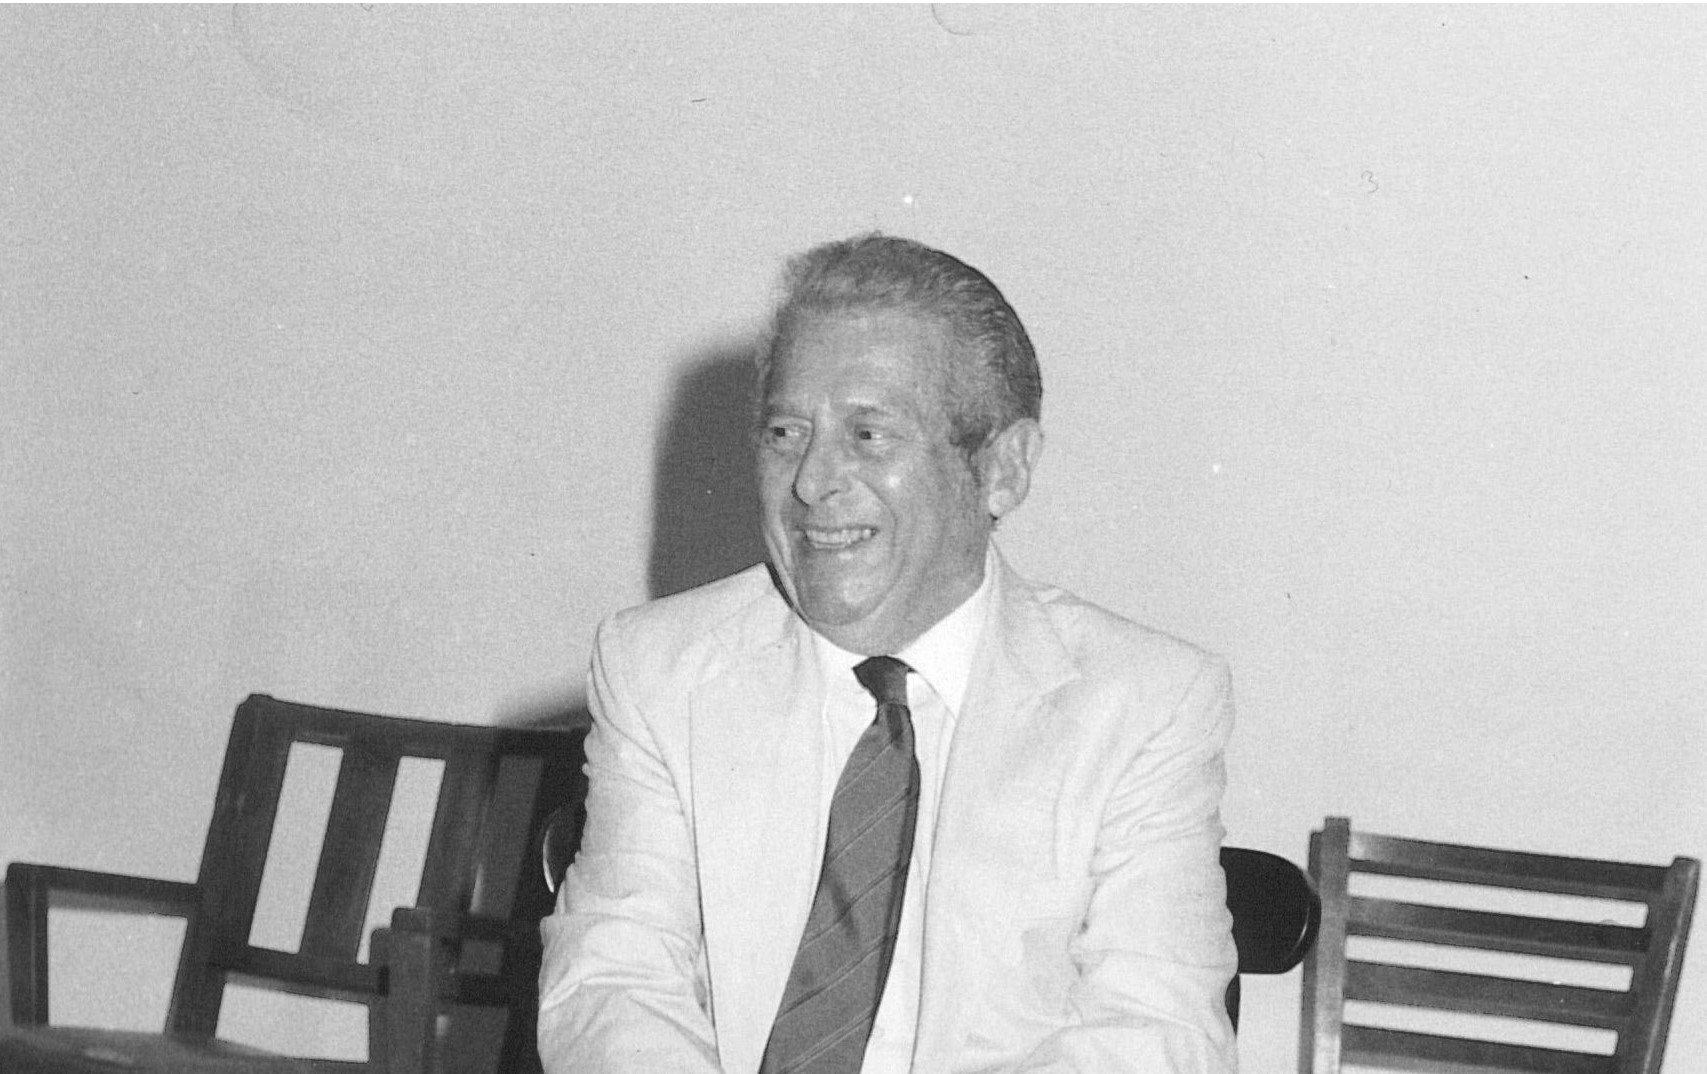 Black and white photo of Irving Kaufman seated